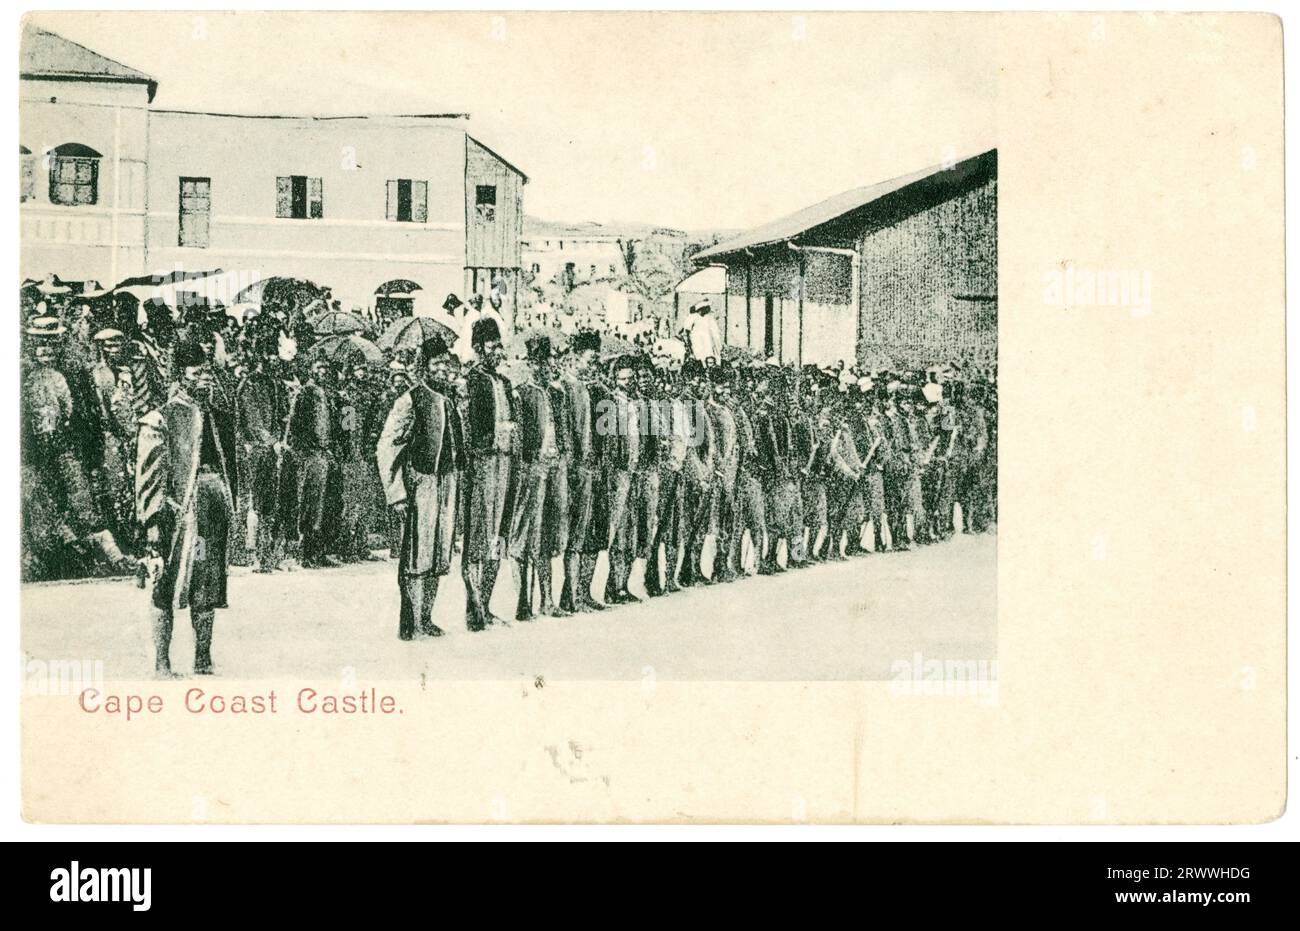 Postcard view of rows of African men lined up outside the castle at Cape Coast. The front row are in dress uniforms, possibly military, and those behind them in smart attire. There is a large crowd in the background. Printed caption: Cape Coast Castle. Stock Photo